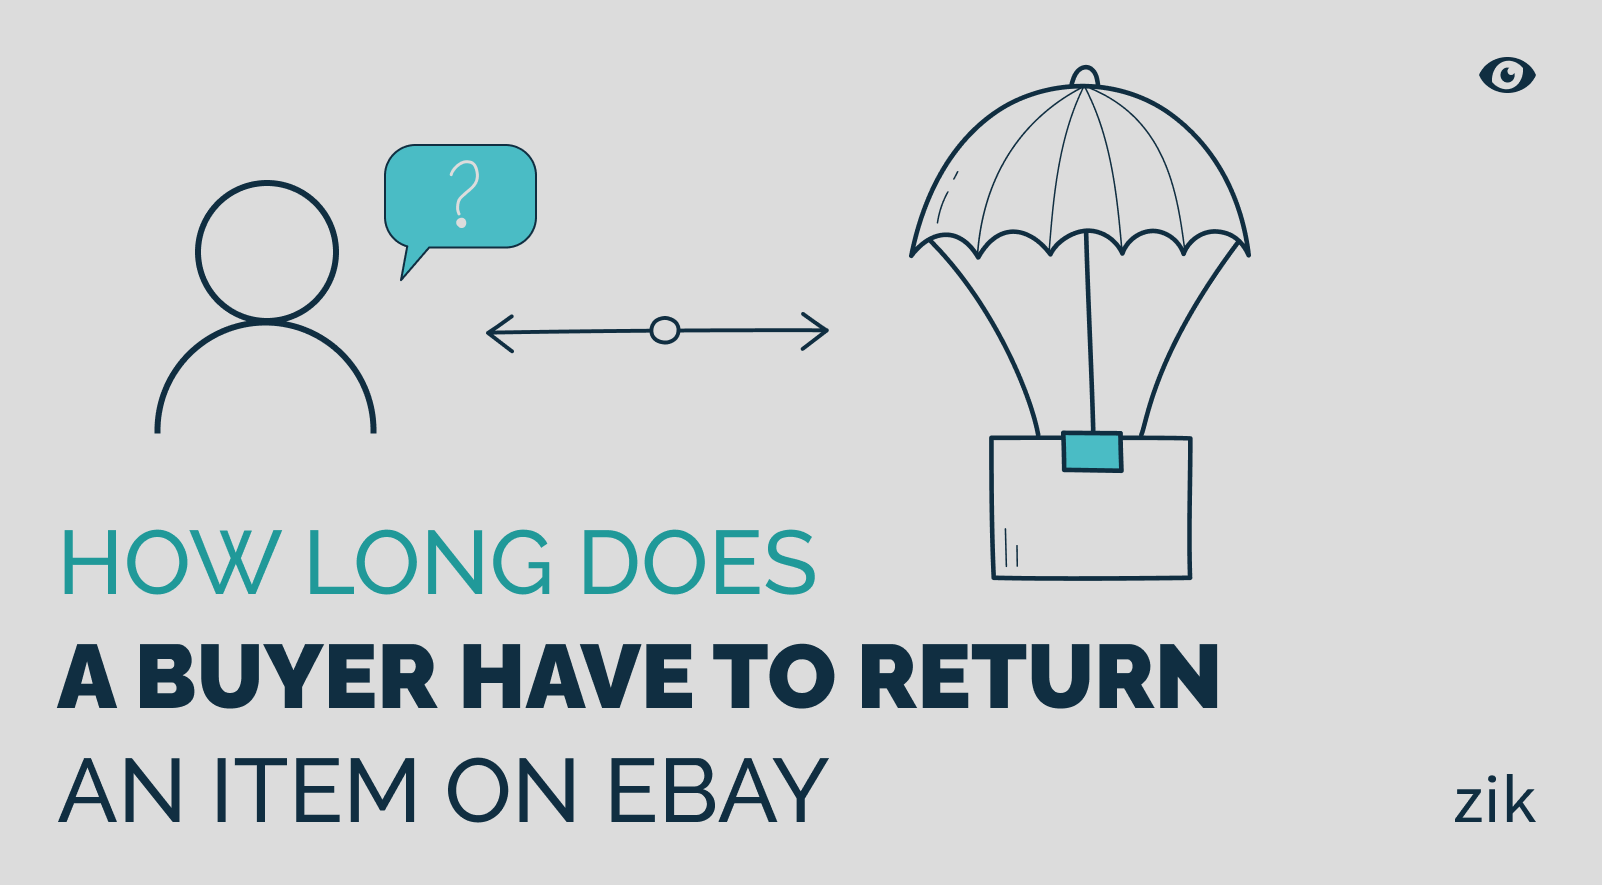 https://www.zikanalytics.com/blog/wp-content/uploads/2023/01/how-long-does-a-buyer-have-to-return-an-item-on-ebay.png